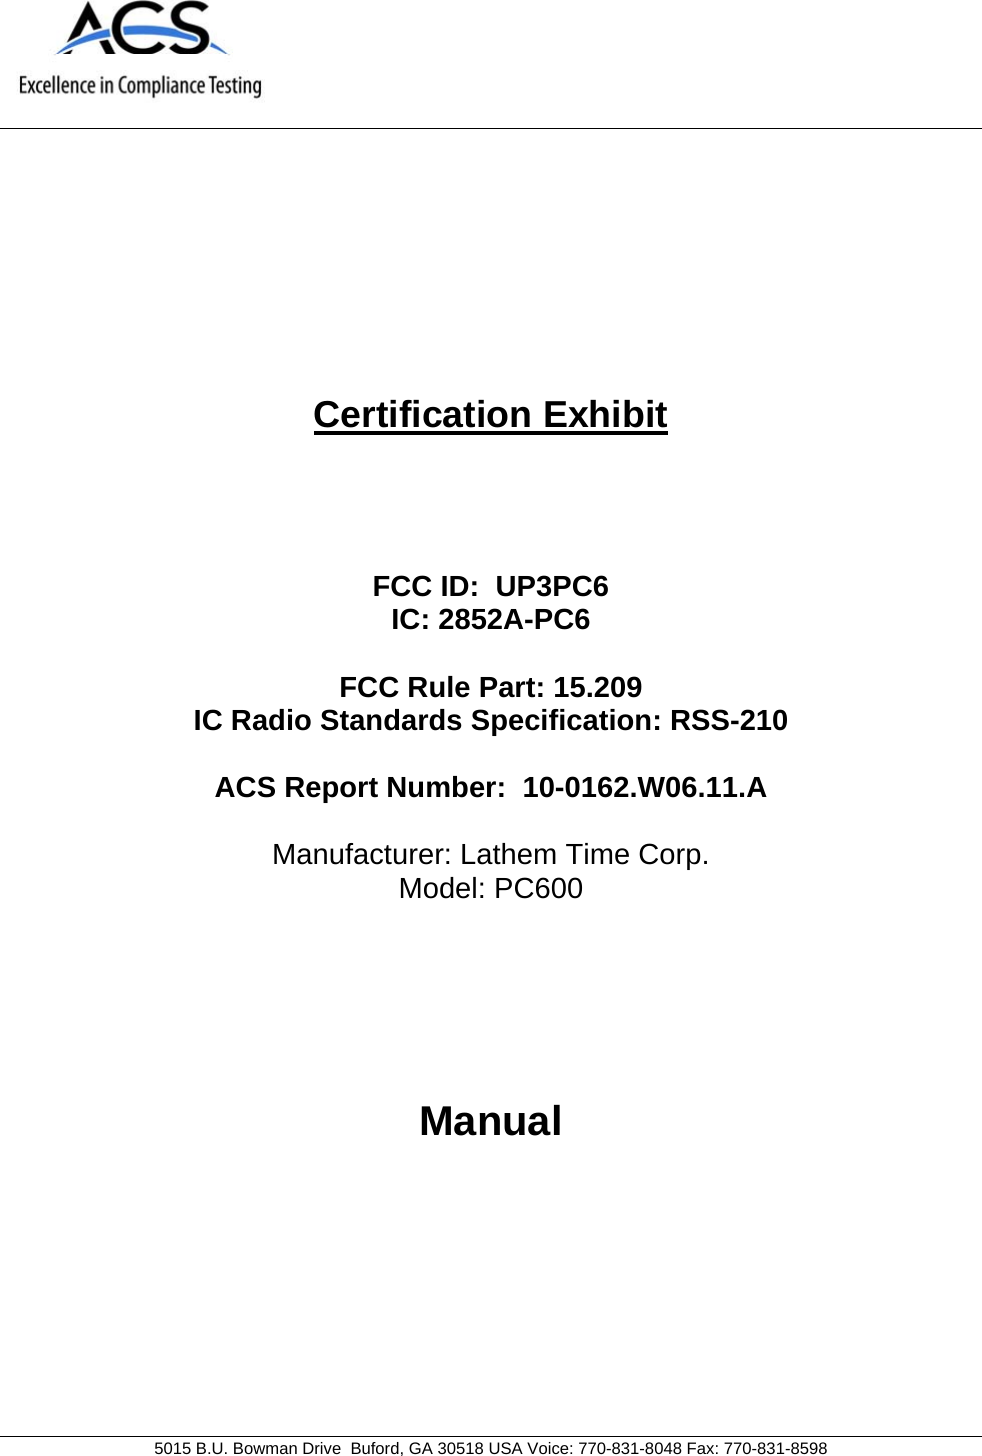     5015 B.U. Bowman Drive  Buford, GA 30518 USA Voice: 770-831-8048 Fax: 770-831-8598   Certification Exhibit     FCC ID:  UP3PC6 IC: 2852A-PC6  FCC Rule Part: 15.209 IC Radio Standards Specification: RSS-210  ACS Report Number:  10-0162.W06.11.A   Manufacturer: Lathem Time Corp. Model: PC600     Manual  